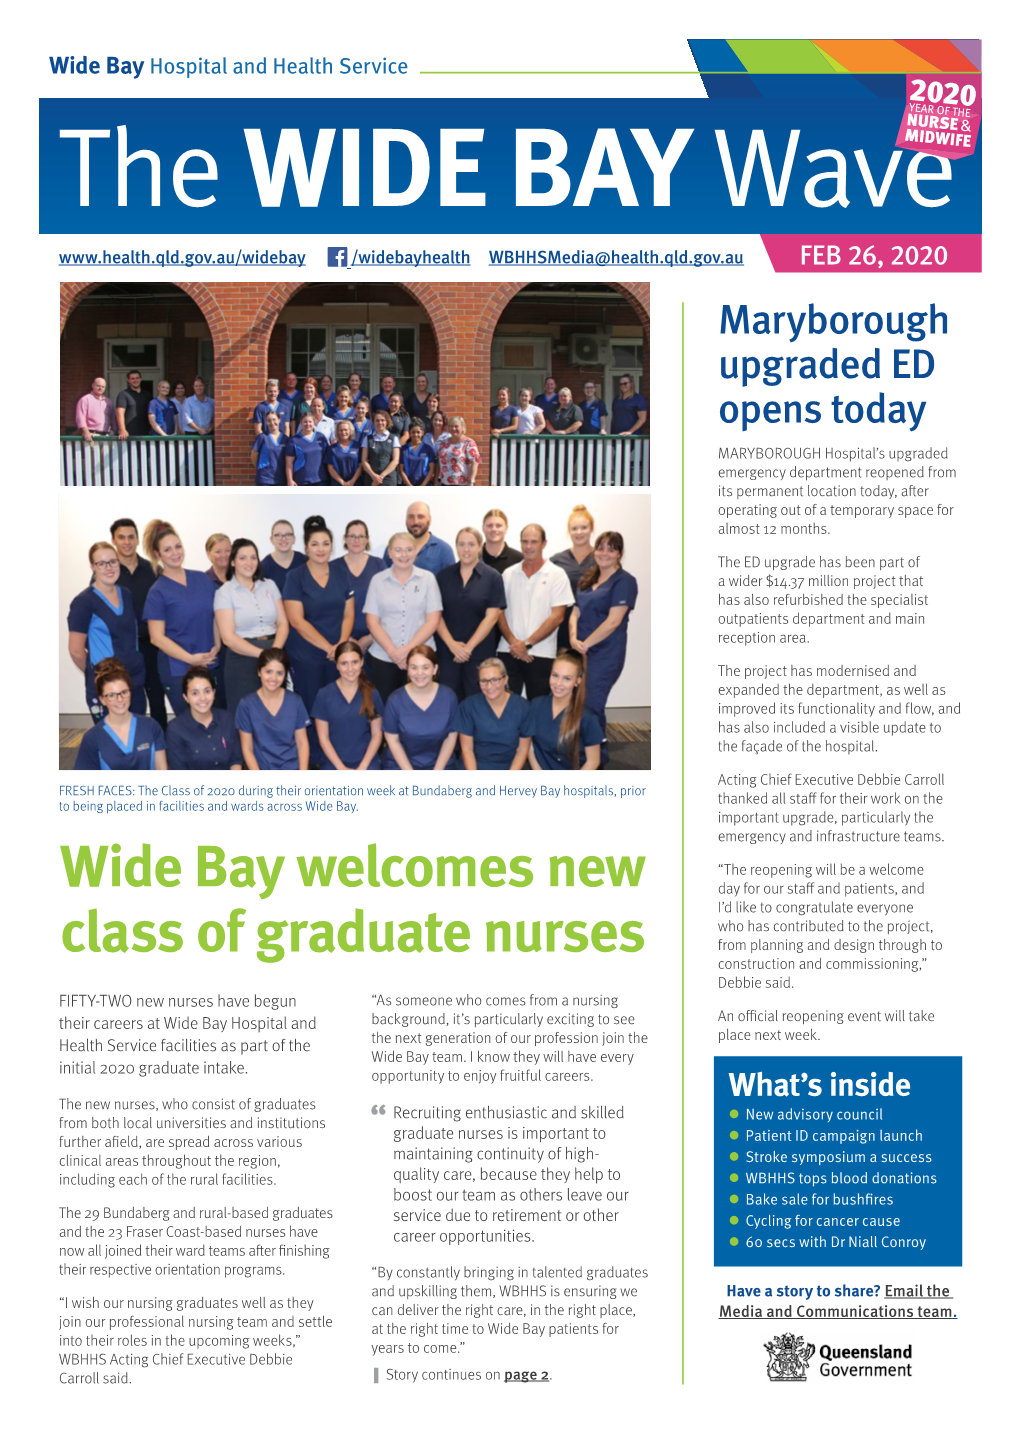 Wide Bay Welcomes New Class of Graduate Nurses